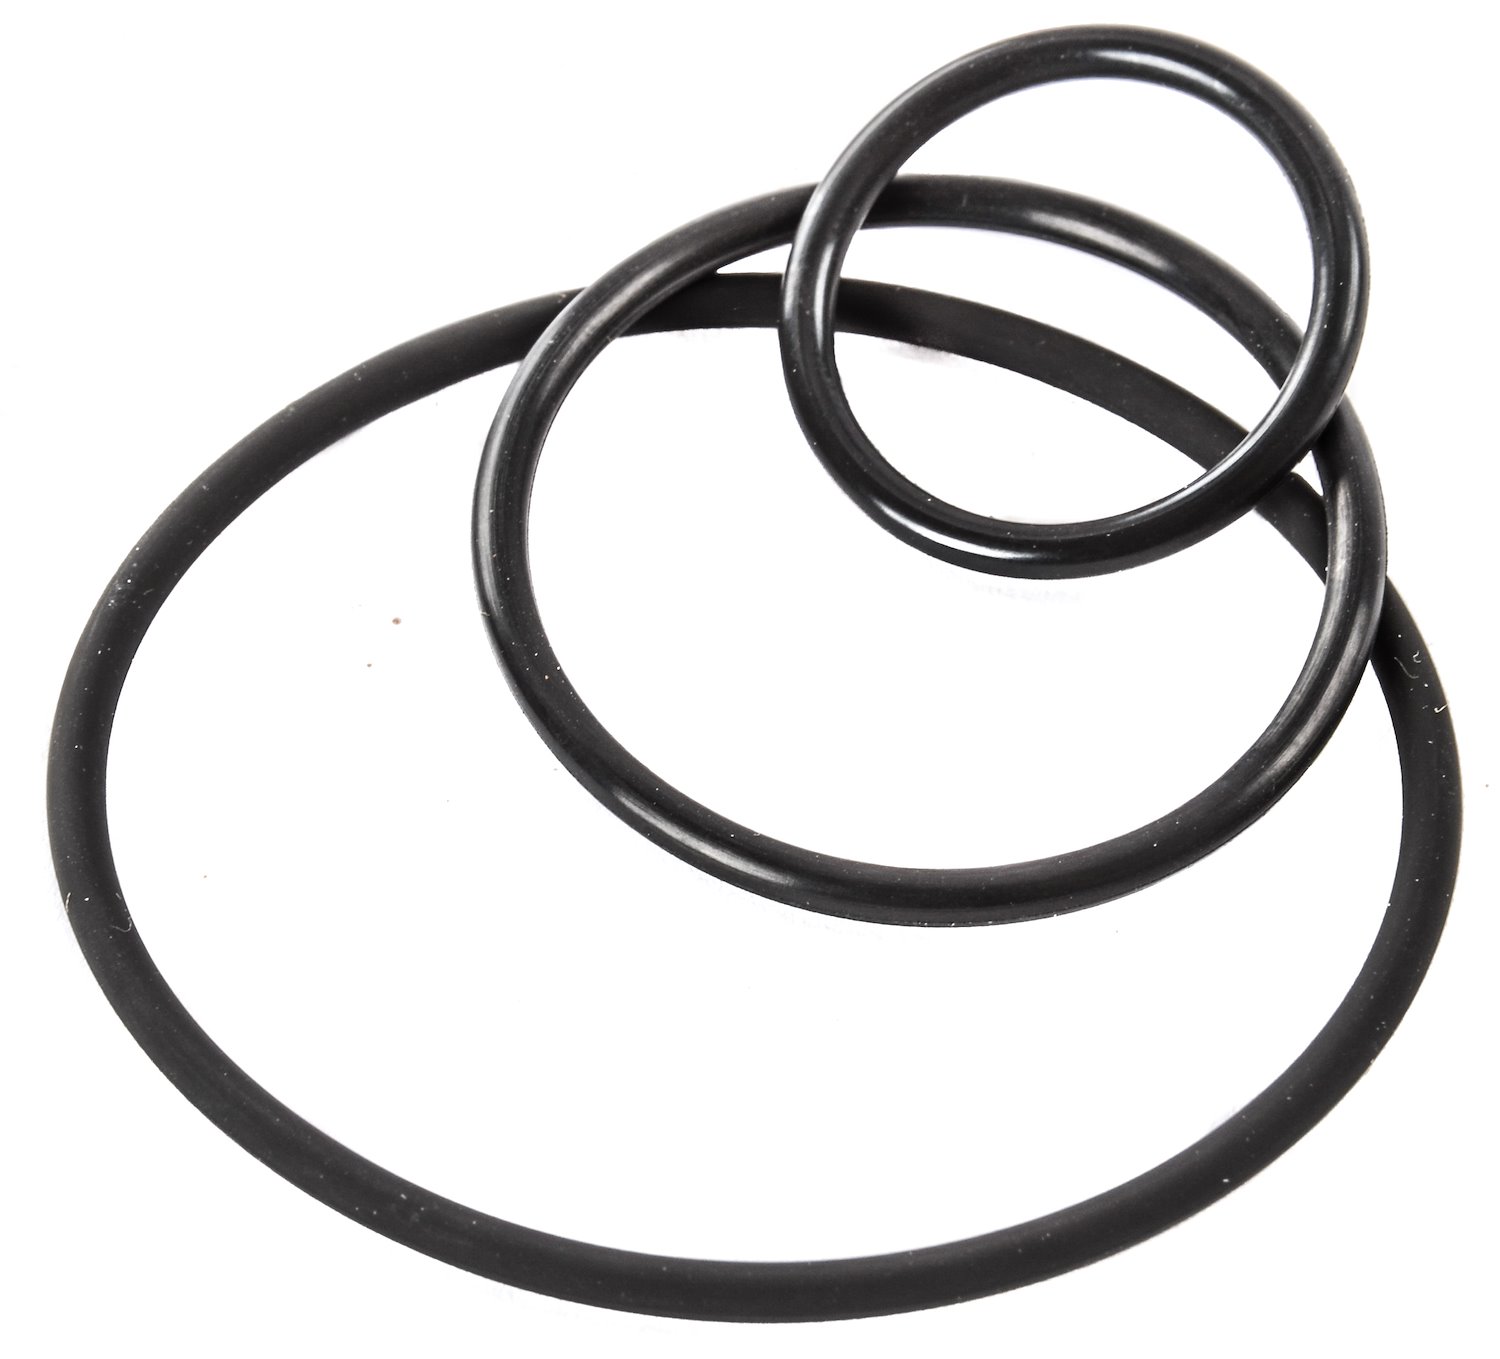 Replacement O-ring Fits Cap on 555-150050, 555-150052, 555-150053 & 555-150054